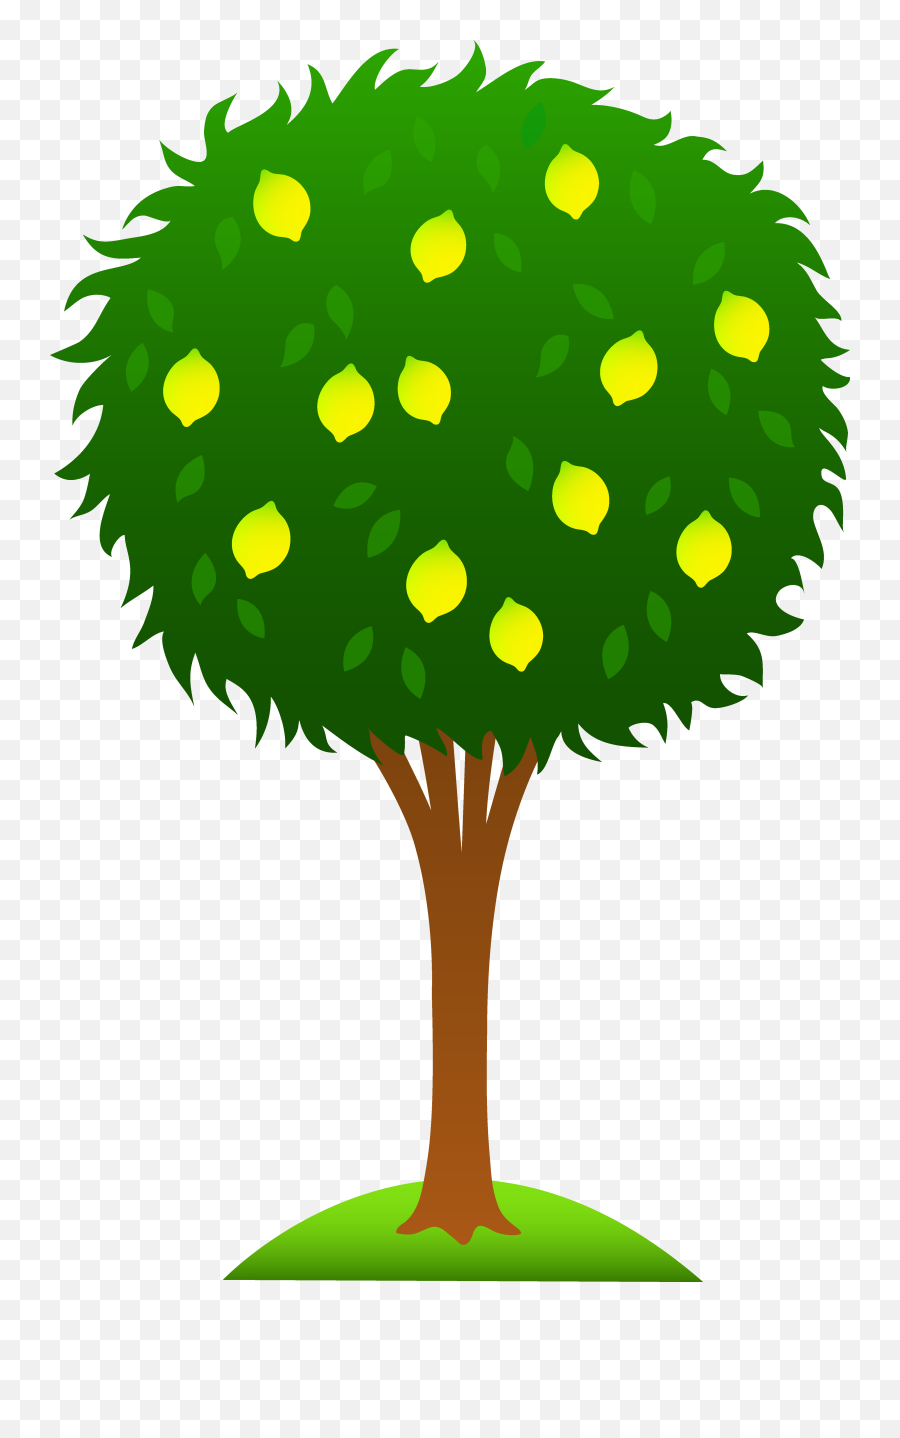 Free Crying Clipart Download Free Clip Art Free Clip Art - Lemon Tree Clipart Png Emoji,Lemon Tears Emoji